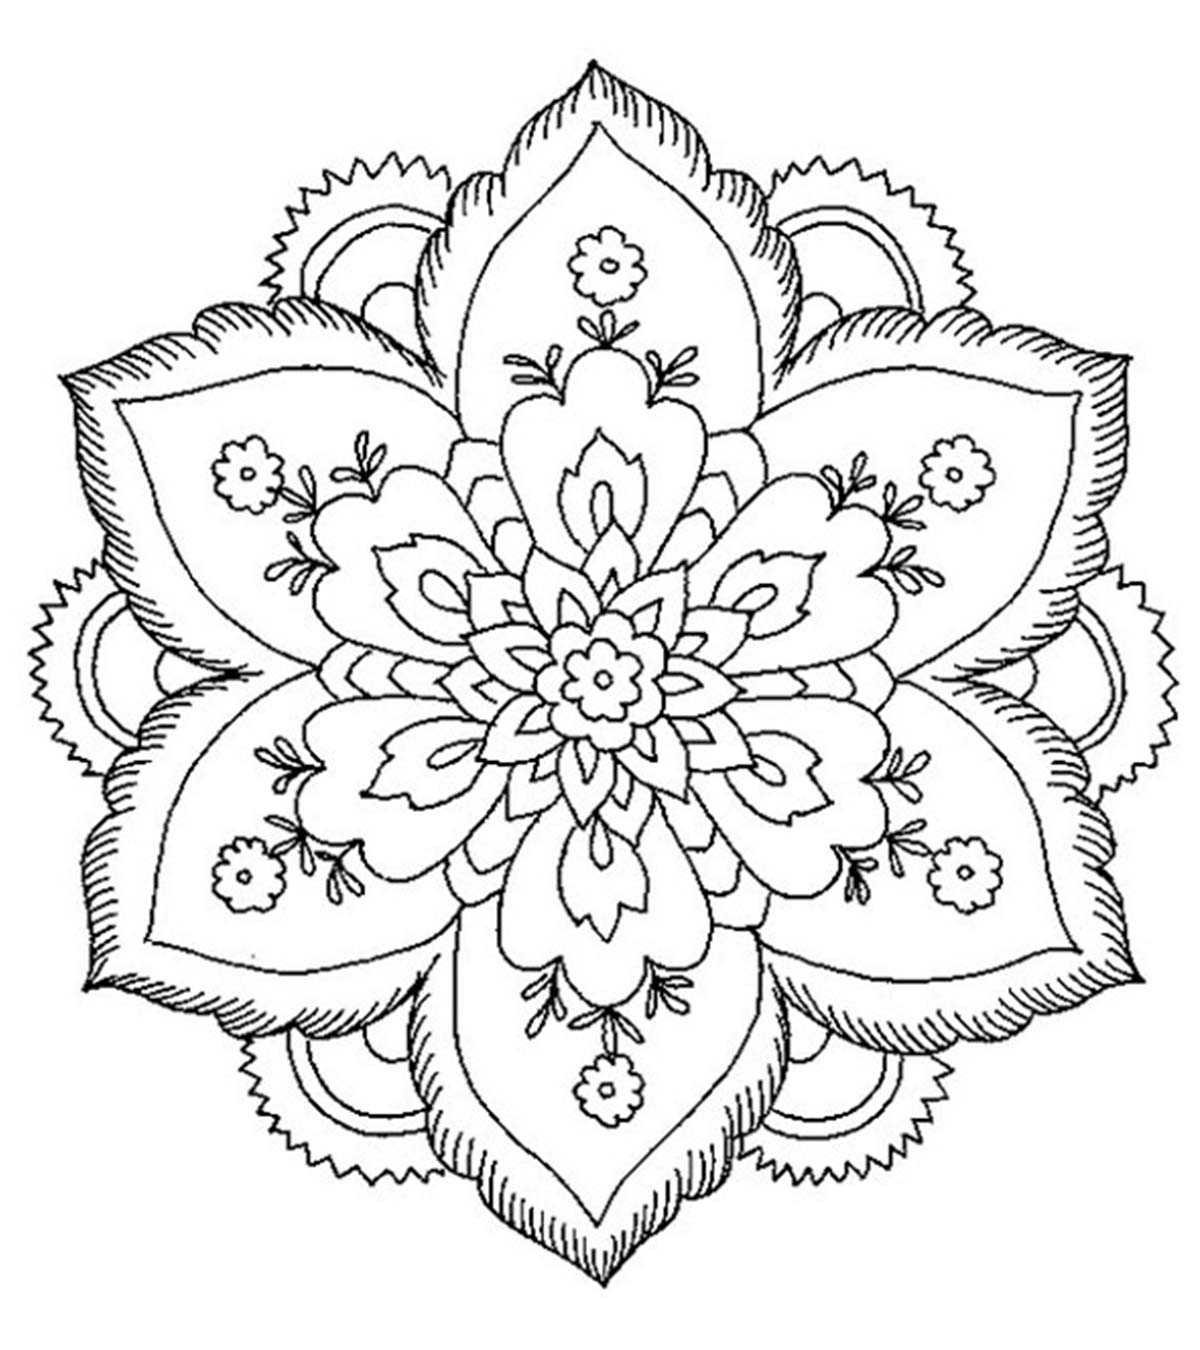 Download Pattern Coloring Pages - MomJunction